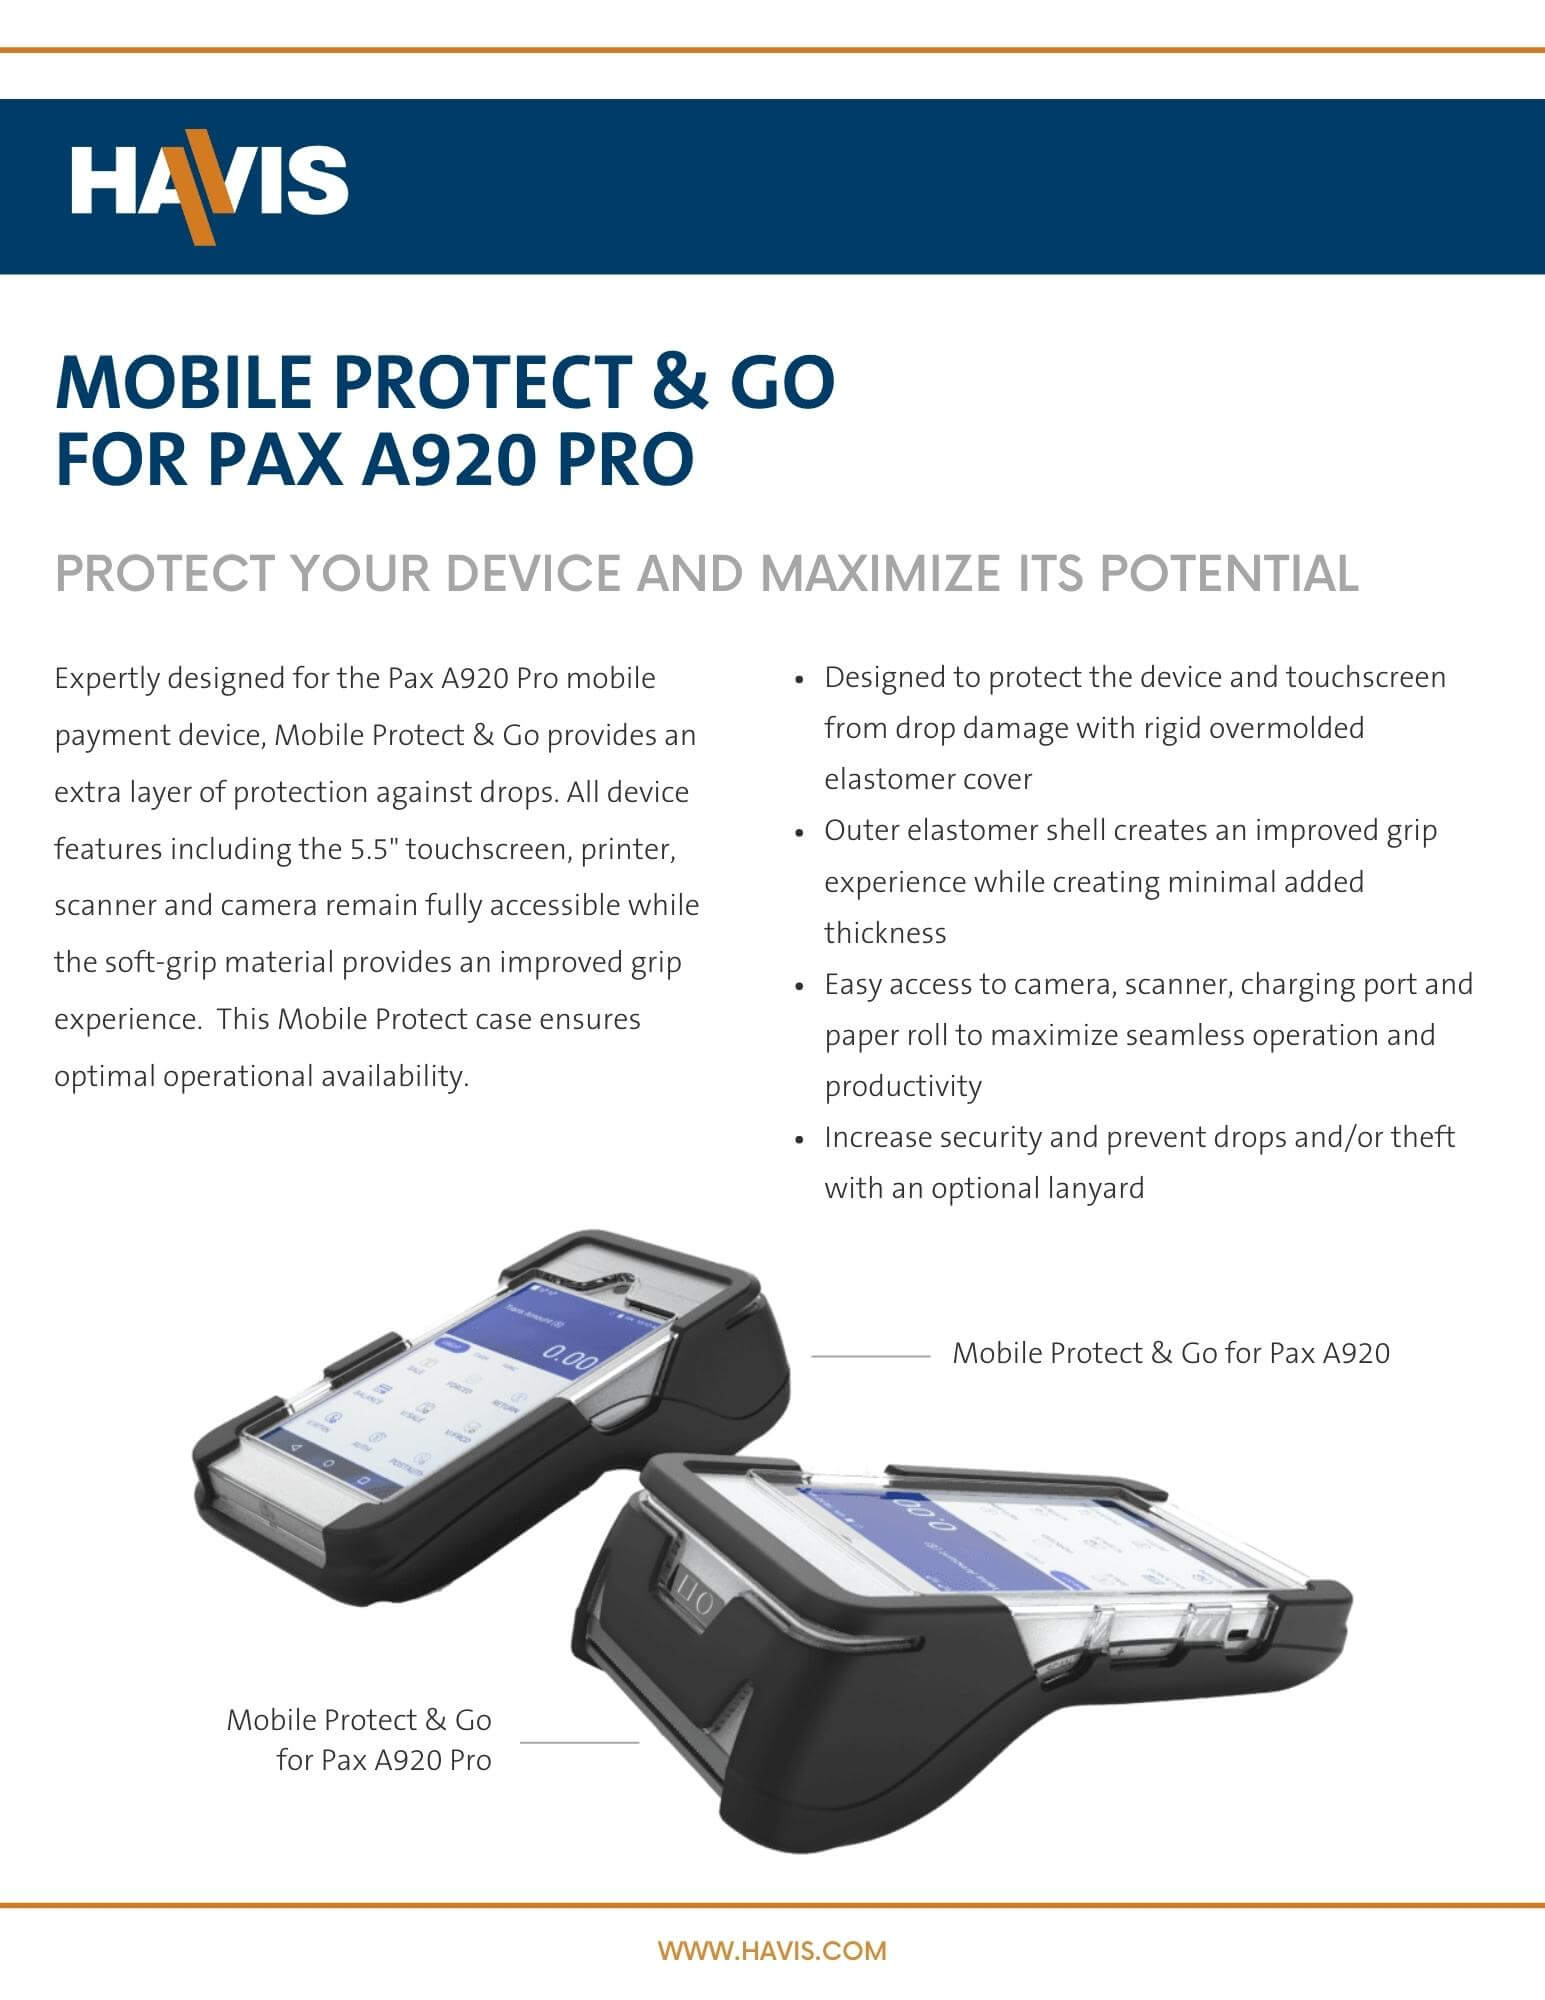 Mobile Protect & Go for PAX A920 Pro Datasheet